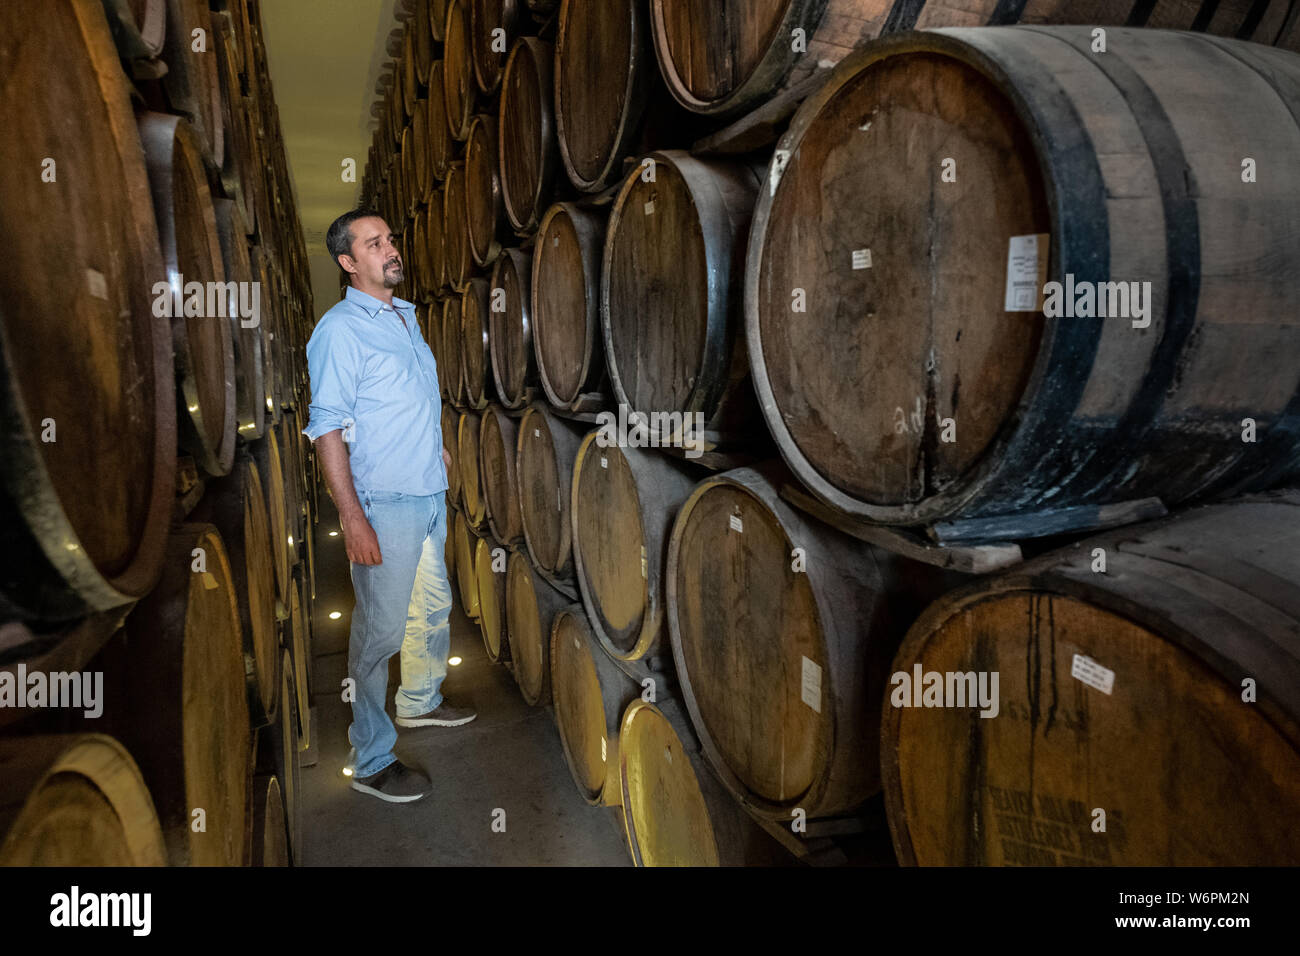 Beto Hernandez, grandson of the founder, inspects tequila aging in the barrel room at the Casa Siete Leguas, El Centenario tequila distillery in Atotonilco de Alto, Jalisco, Mexico. The Seven Leagues tequila distillery is the oldest family owned distillery producing authentic handcrafted tequila using traditional methods. Stock Photo